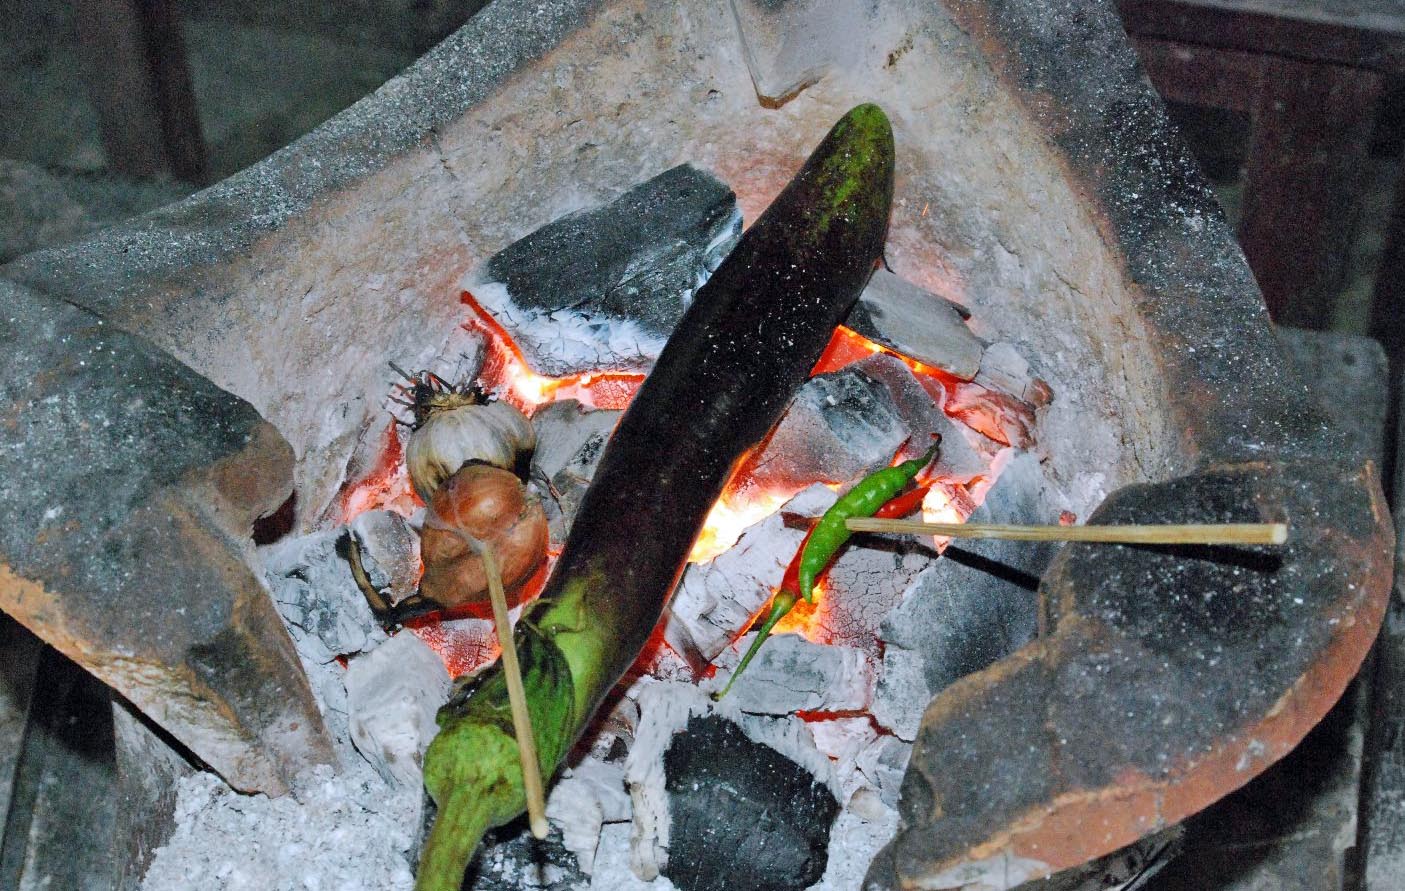 Burning eggplants for spicy Laotian dip | NY Food Journal